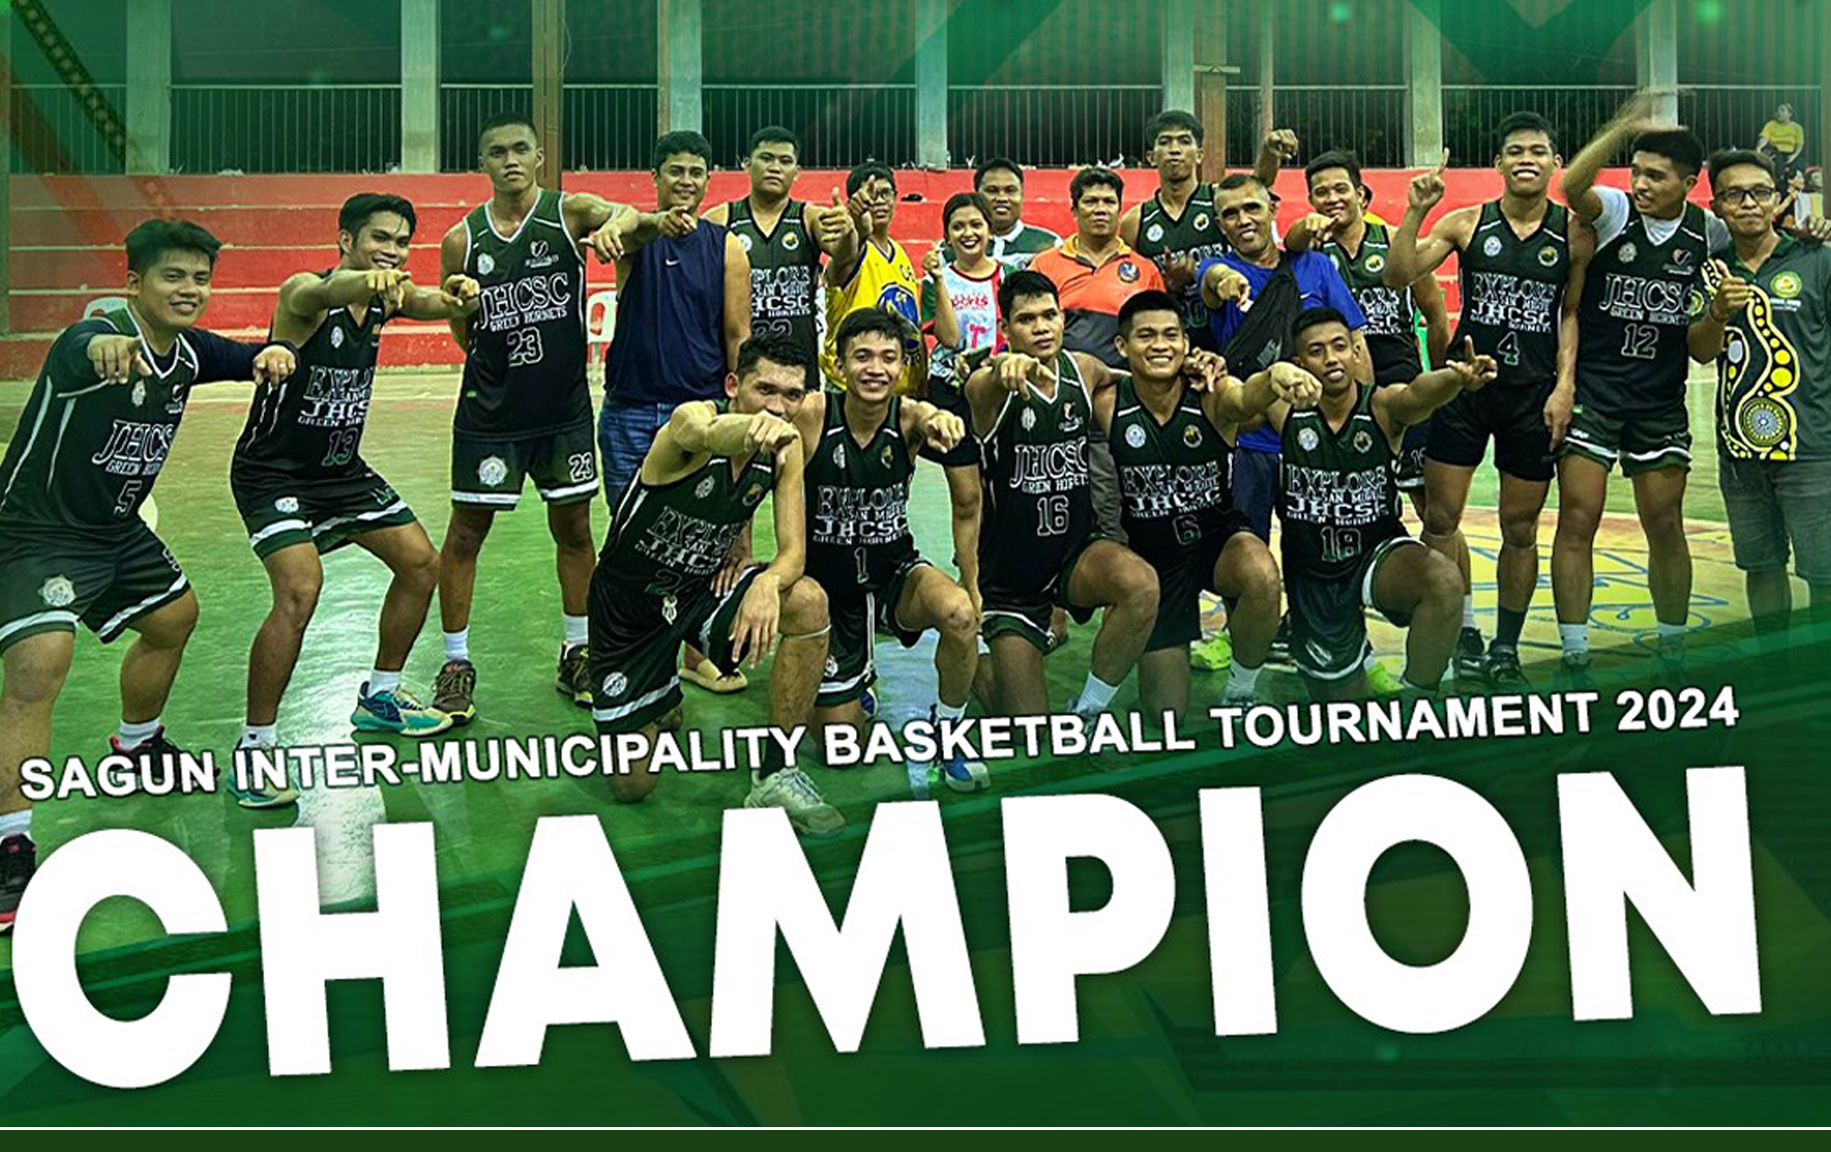 JHCSC Green Hornets Clinched the Championship Title in the Inter-Municipality Basketball Tournament 2024